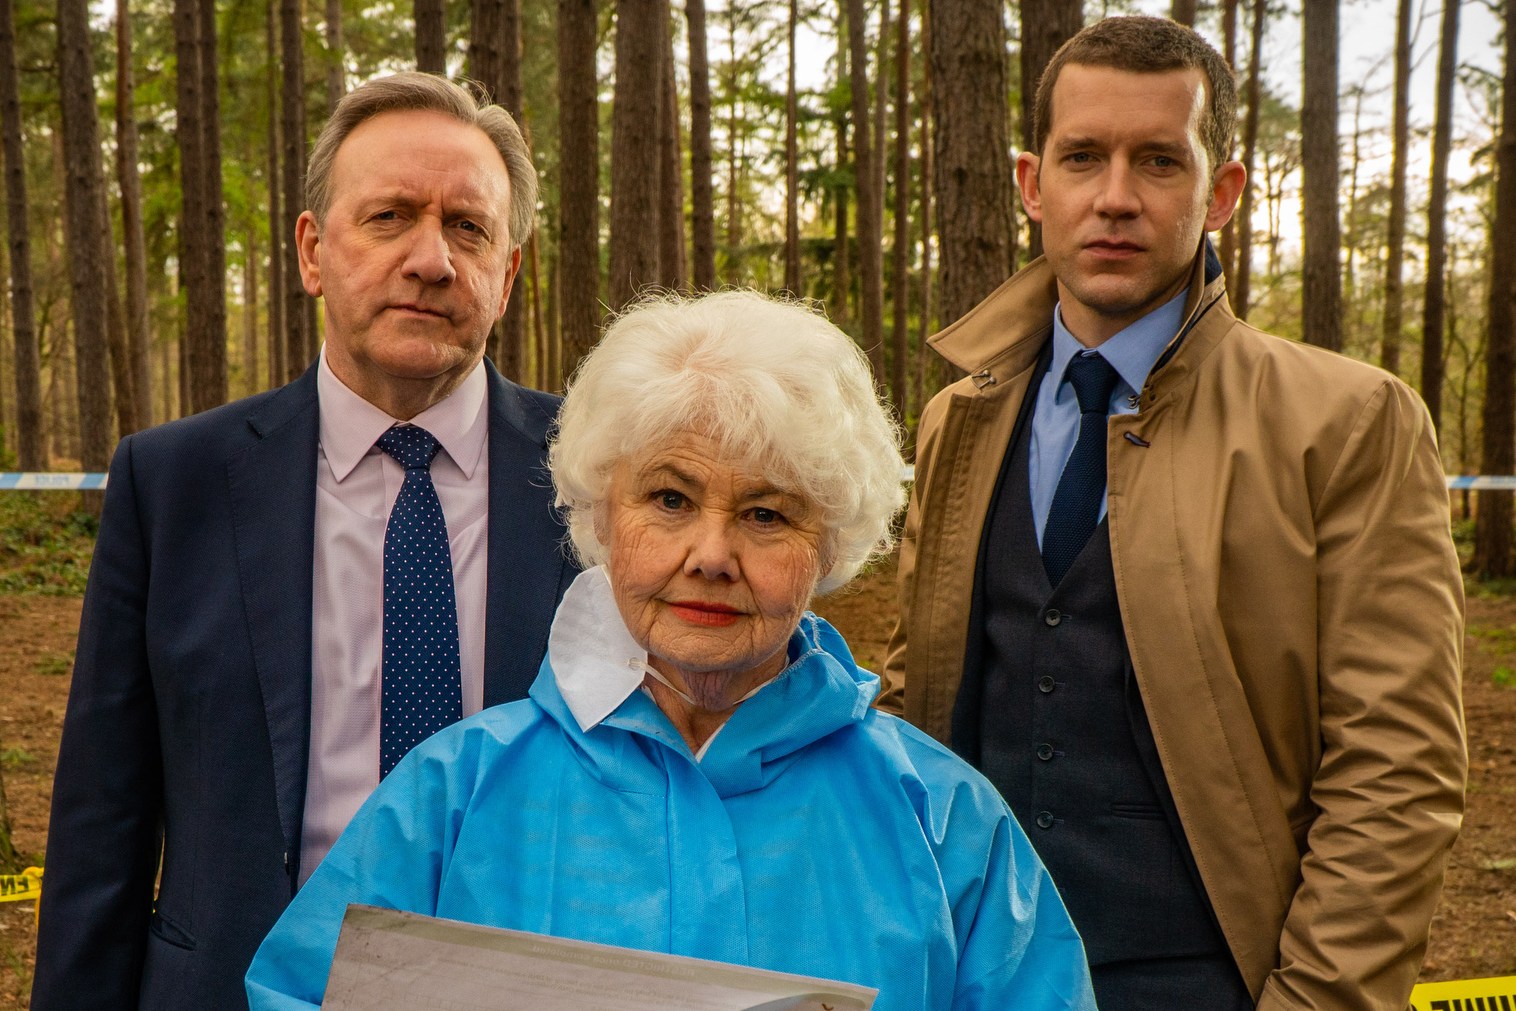 Are Midsomer Murders’ homicides getting vanilla? More sadism, please!